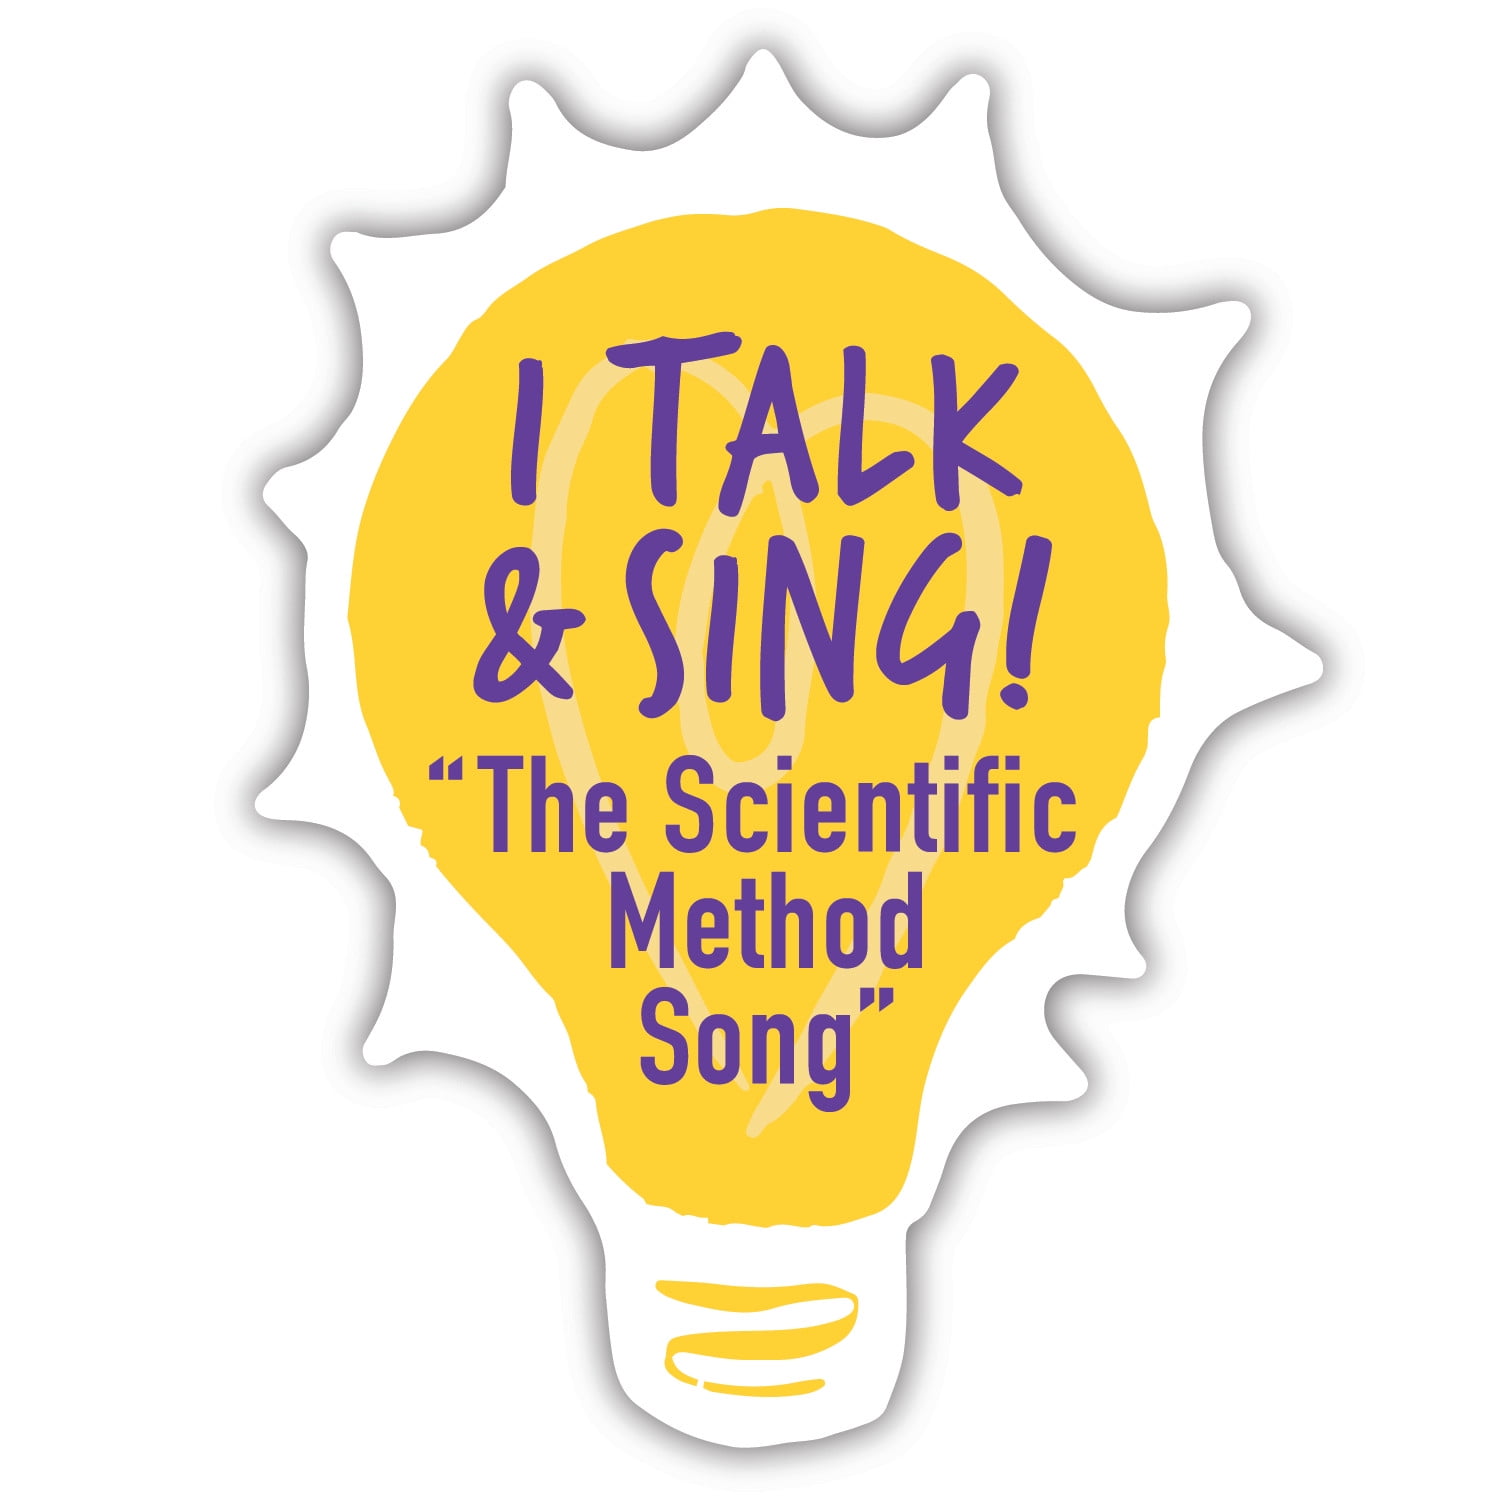 Just Play Ada Twist Scientist Singing Ada 18 Inch Interactive Plush Talks Multi-Color,31904 Lights Up and Sings The Scientific Method Song 